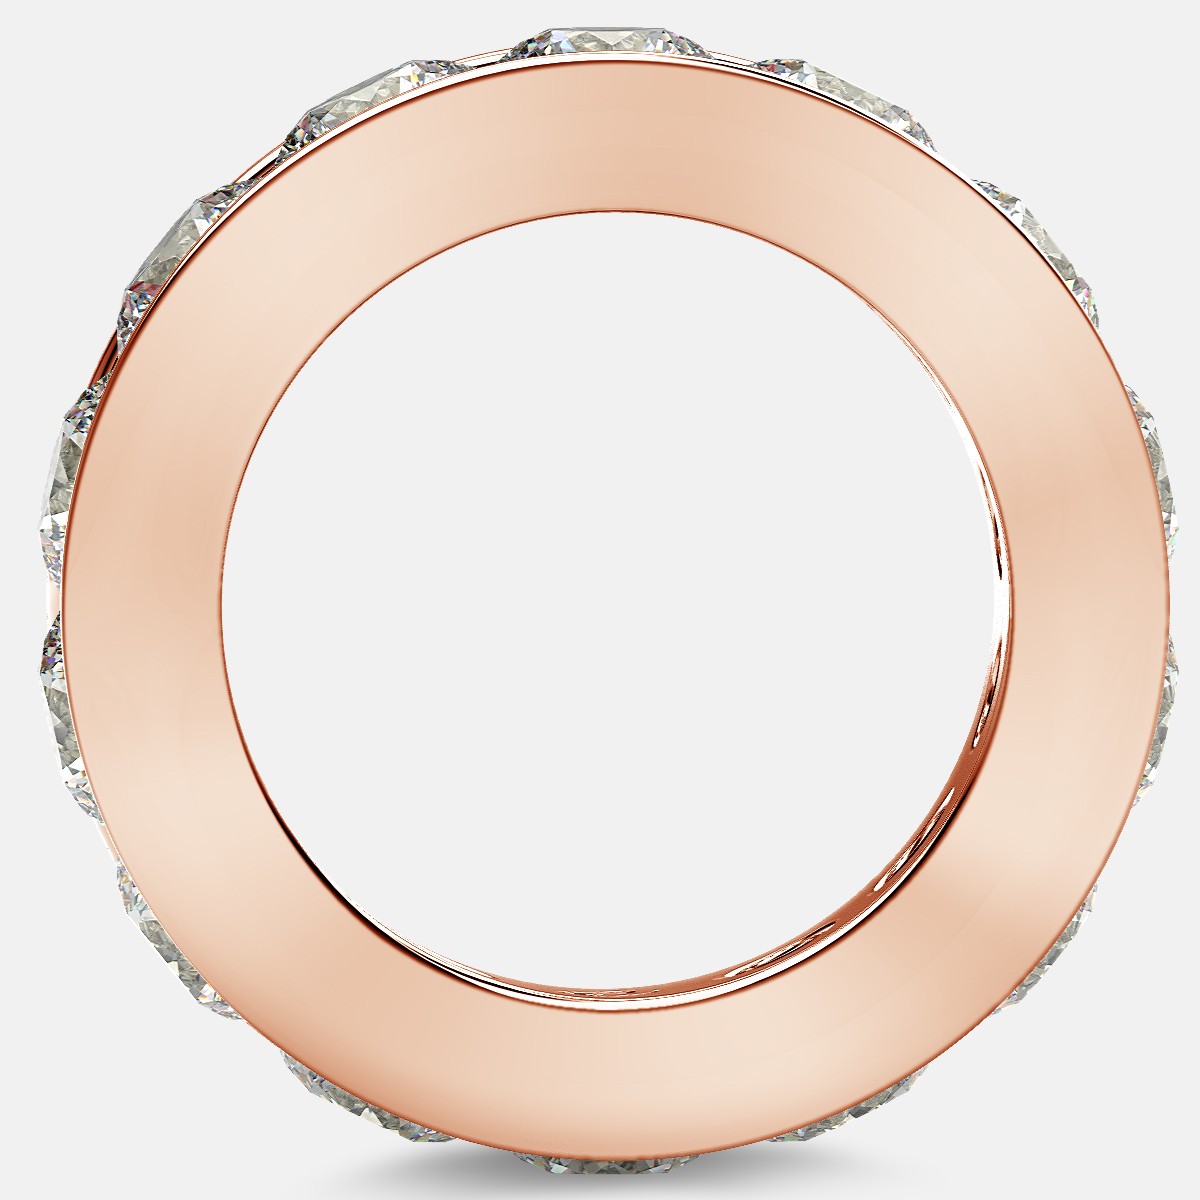 Channel Set Eternity Ring with Round Diamonds in 18k Rose Gold